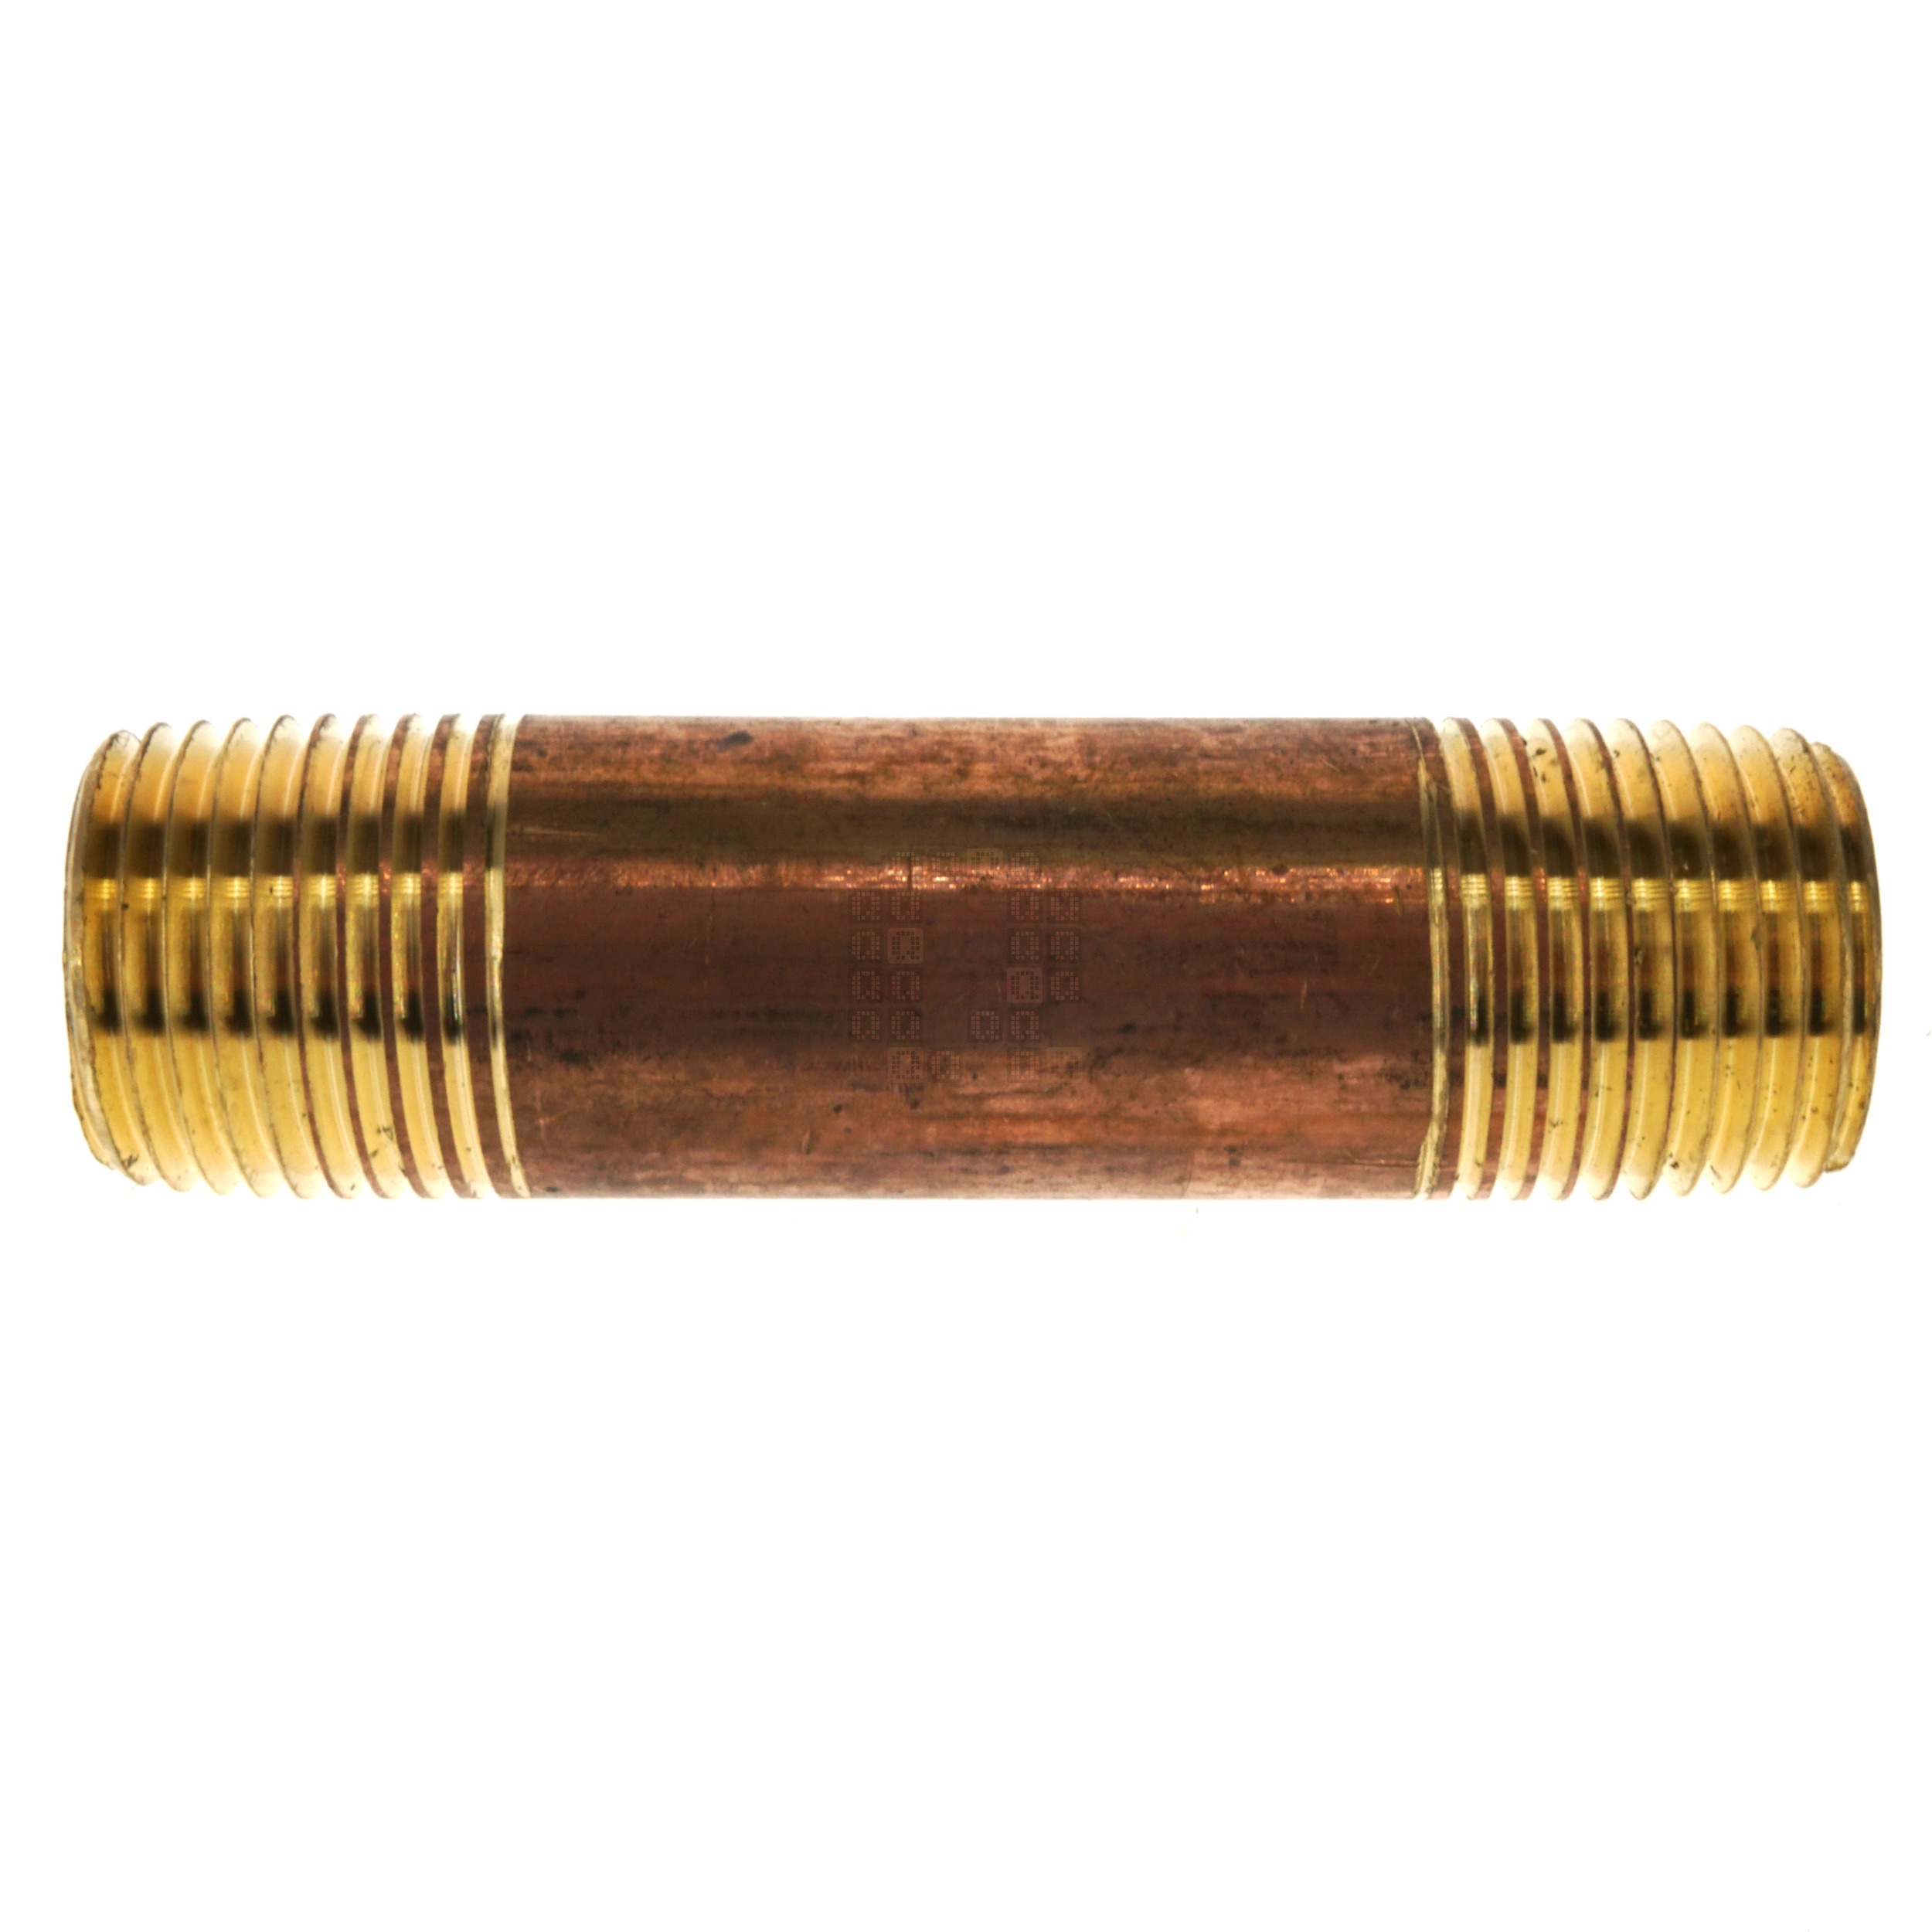 Anderson Metals 38300-0830 1/2" x 3" Red Brass Pipe Nipple